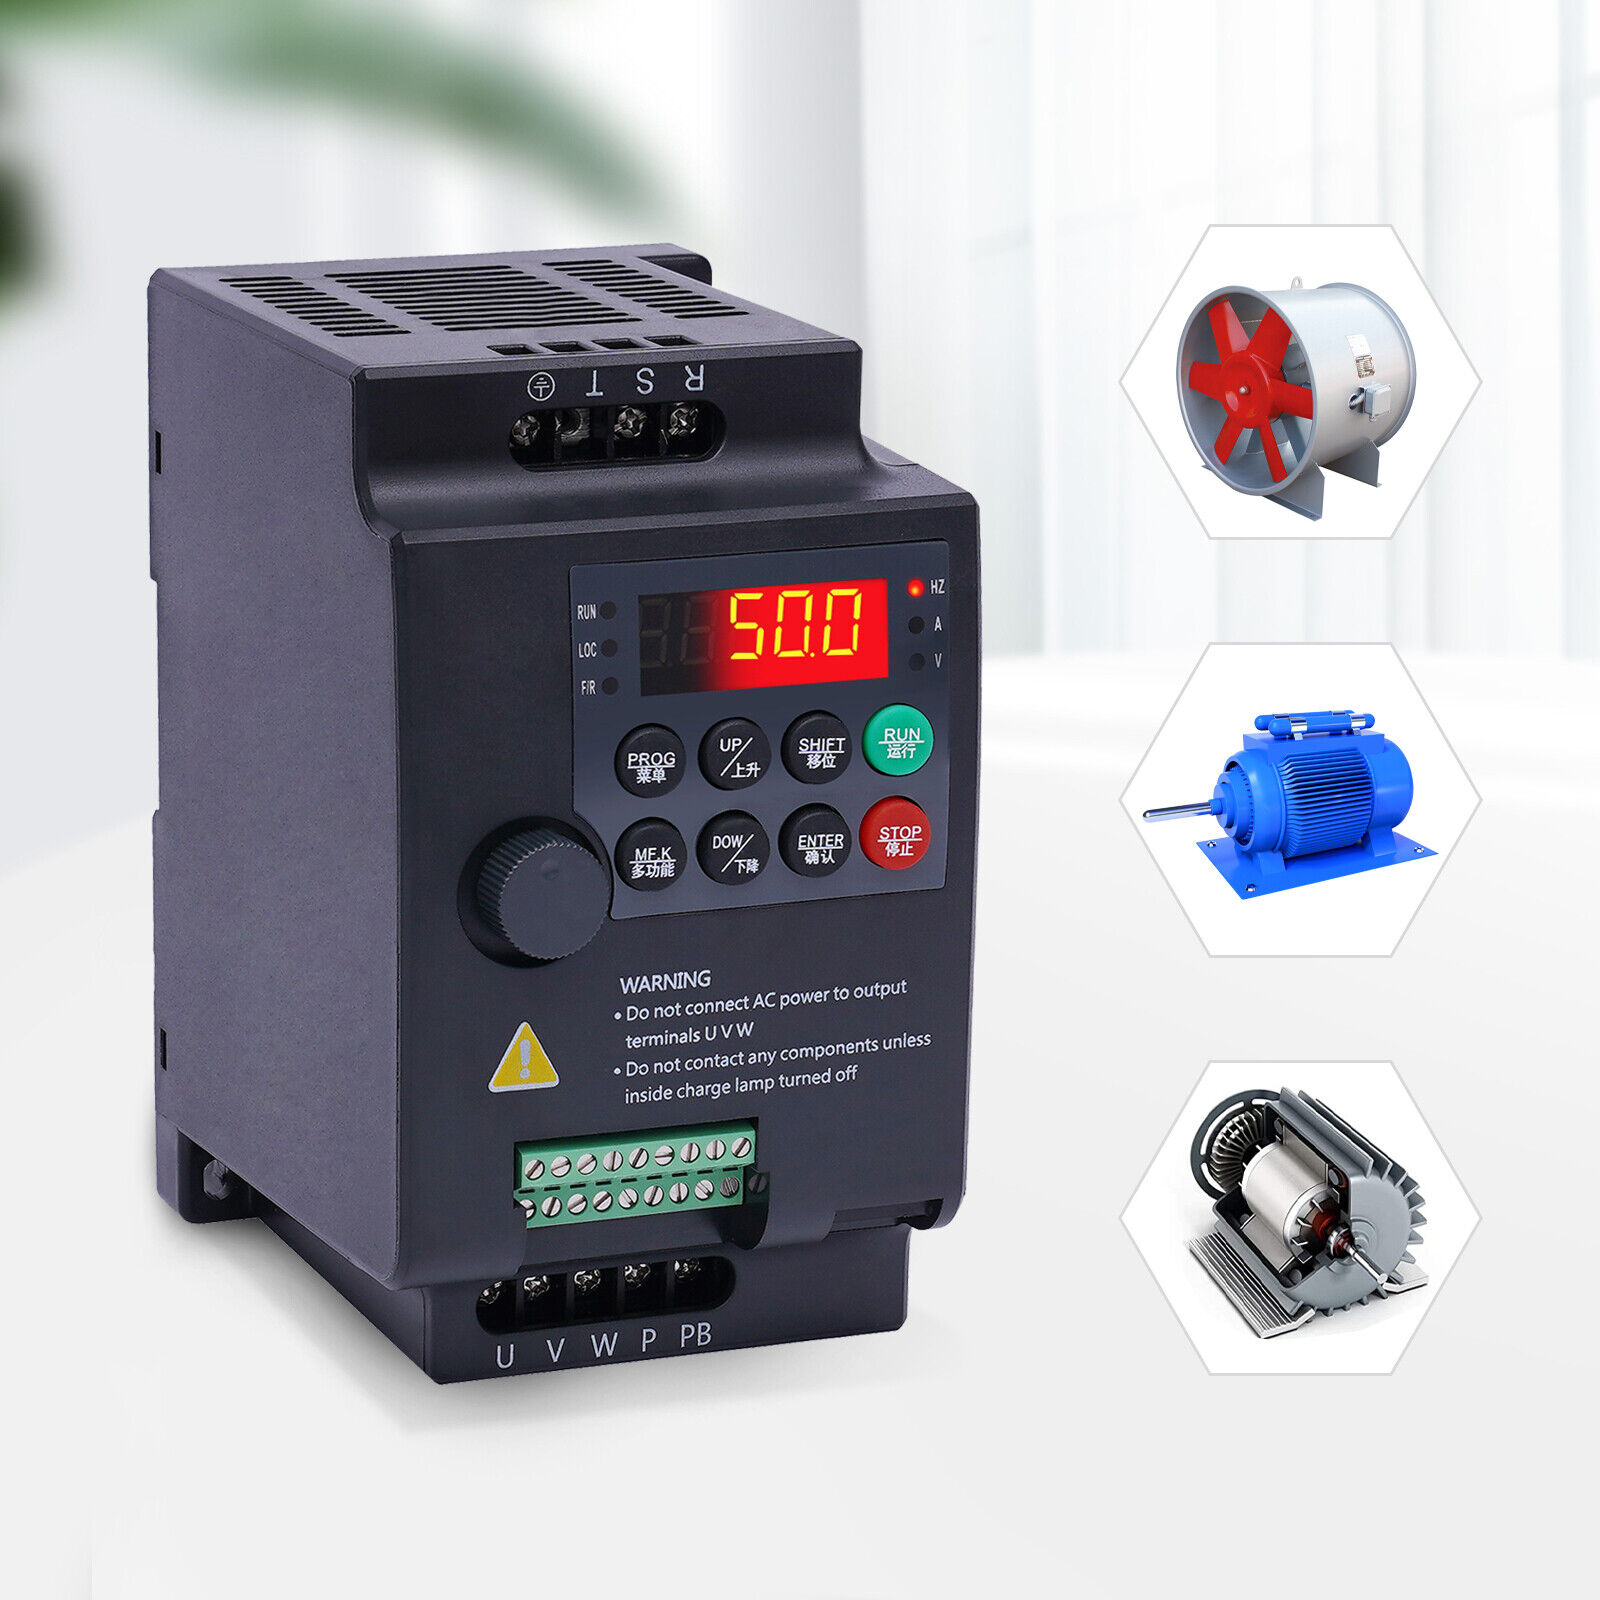 【USA】 0.75KW 220V Inverter VFD Variable Frequency Drive 1000hz Speed Controller